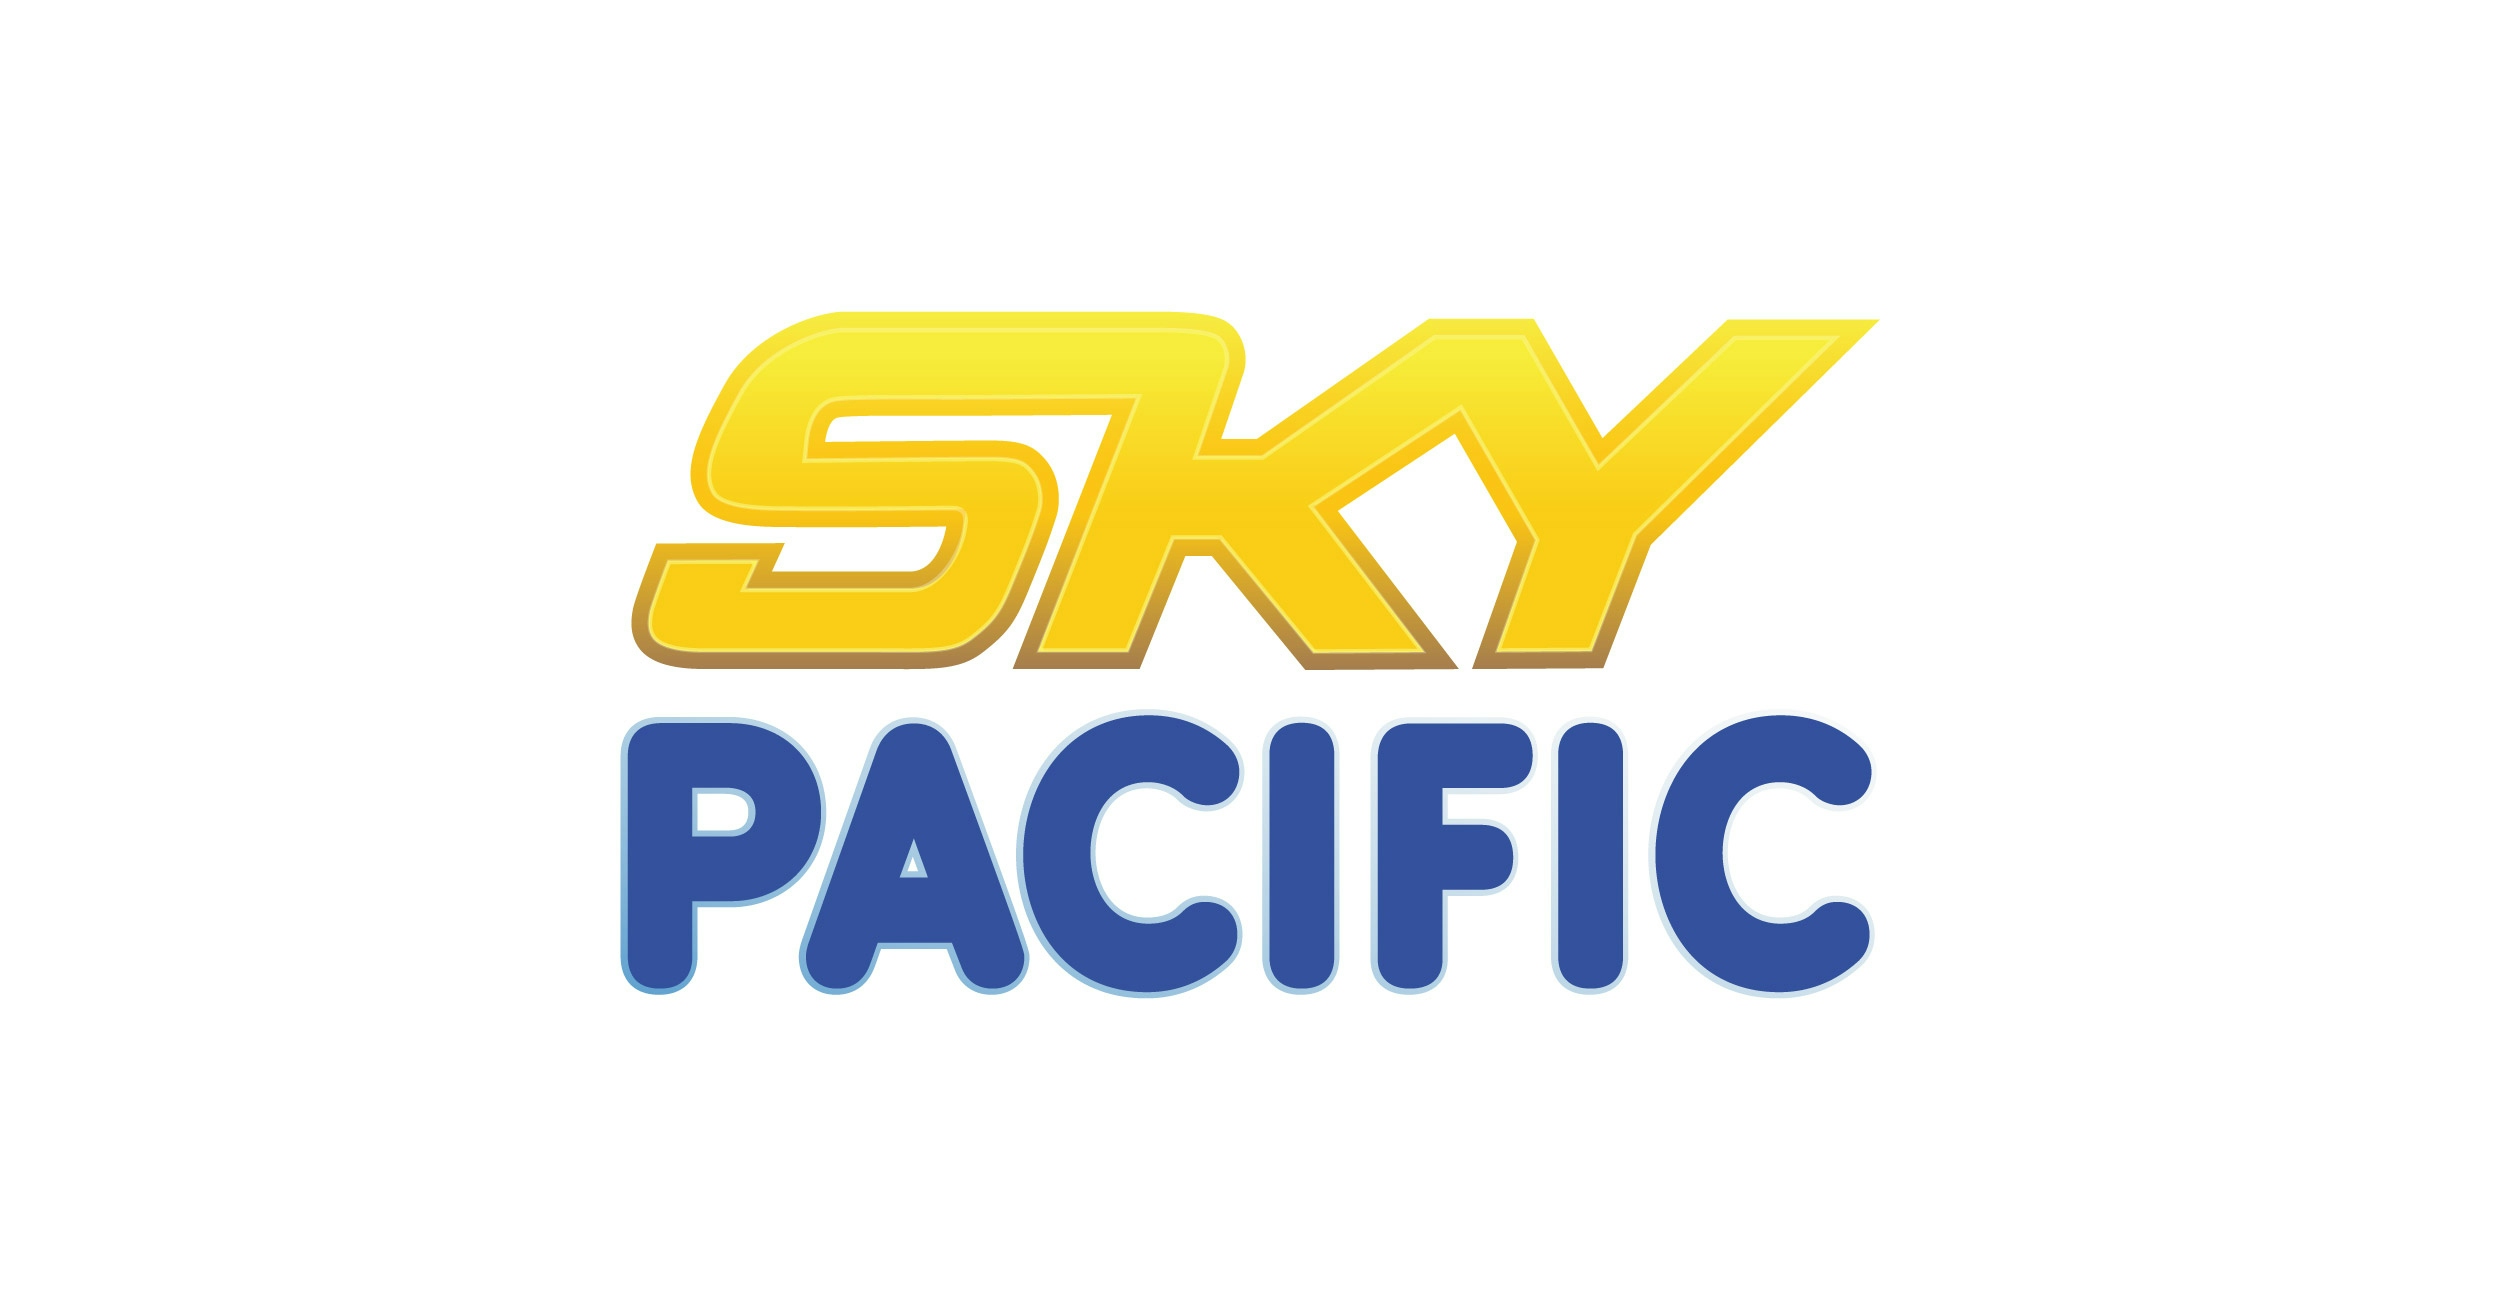 The Sky Pacific logo